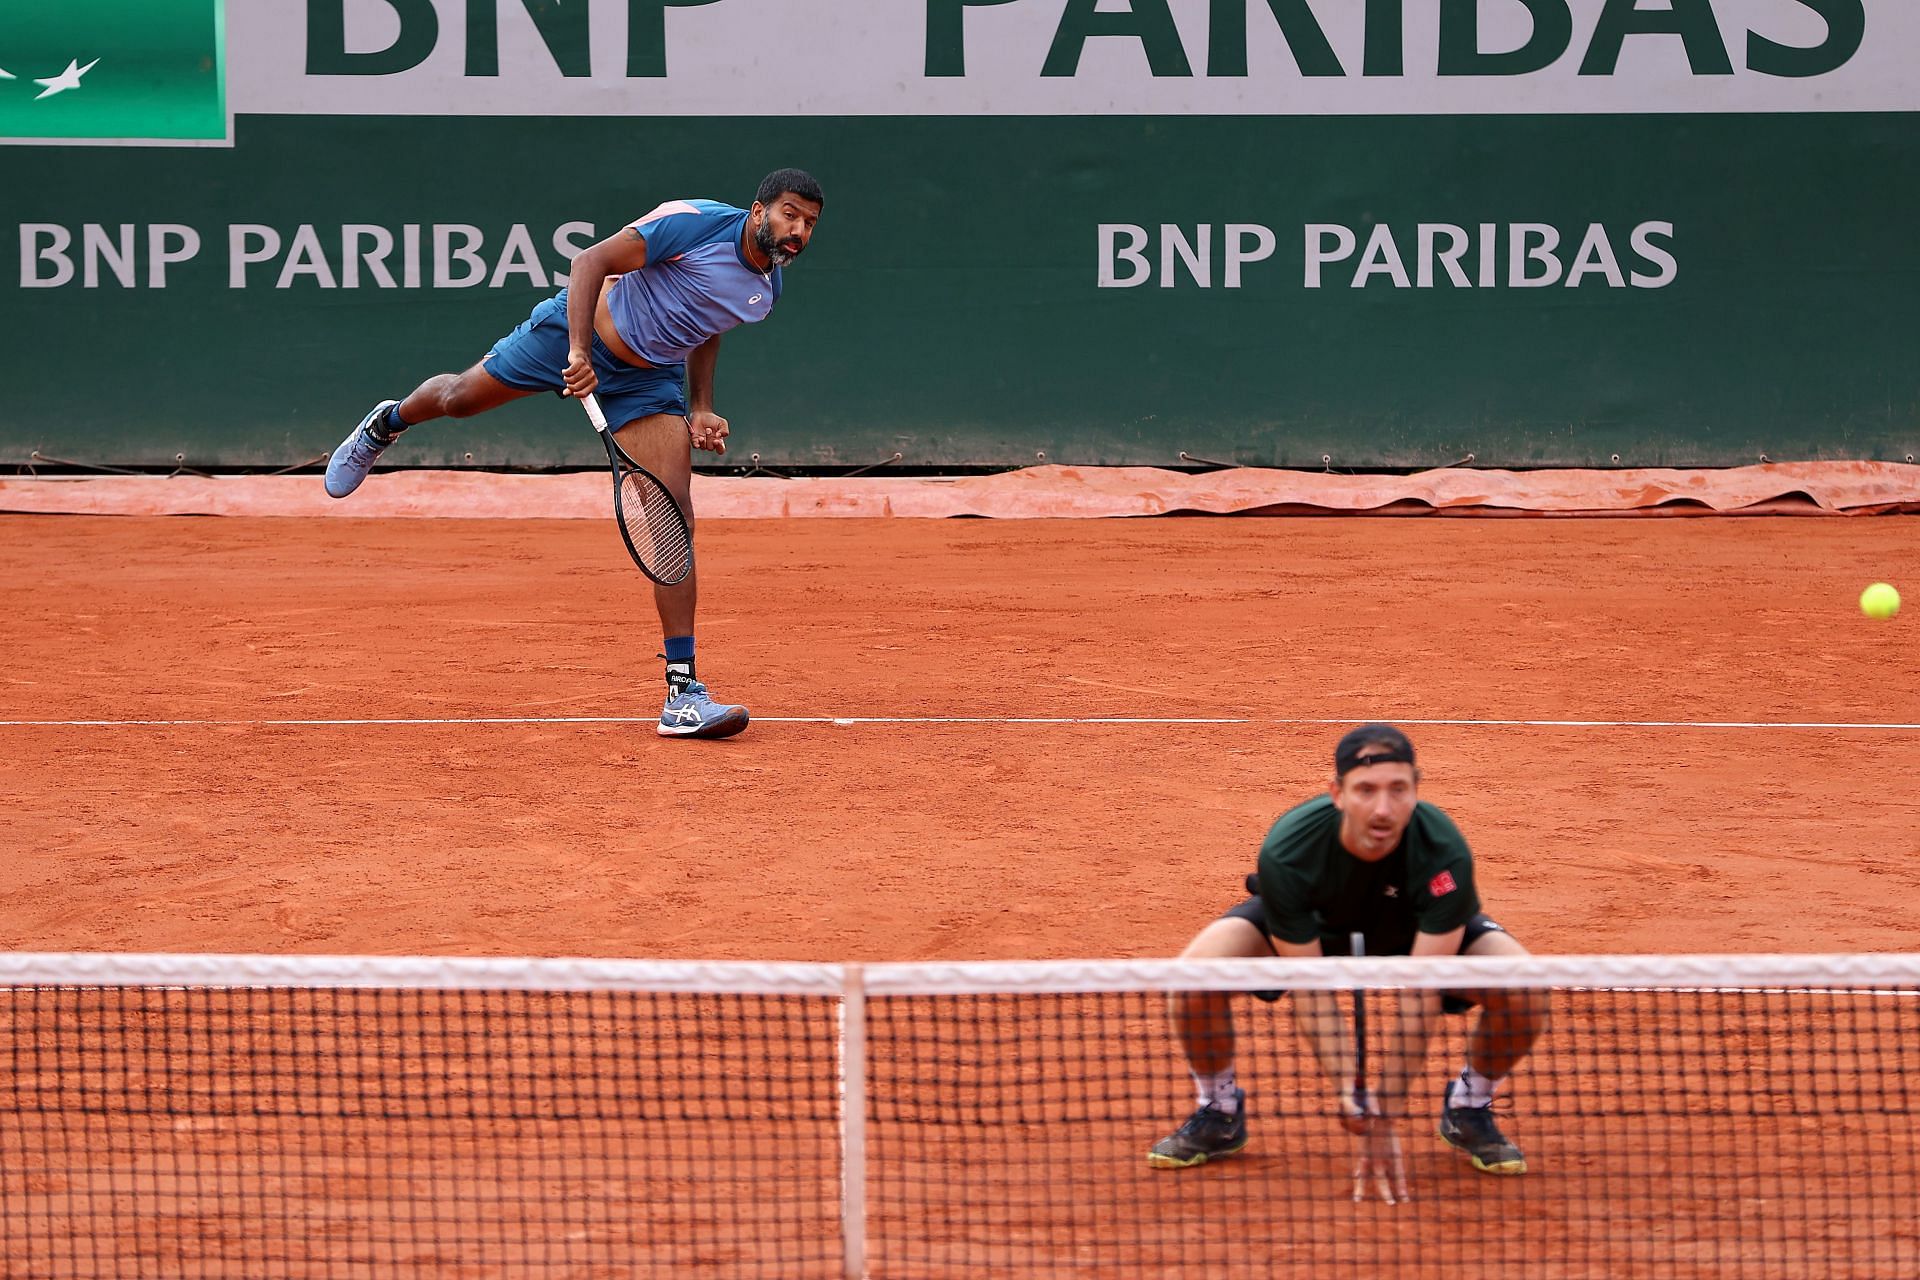 Rohan Bopanna (L) and Matwe Middelkoop at the 2022 French Open.